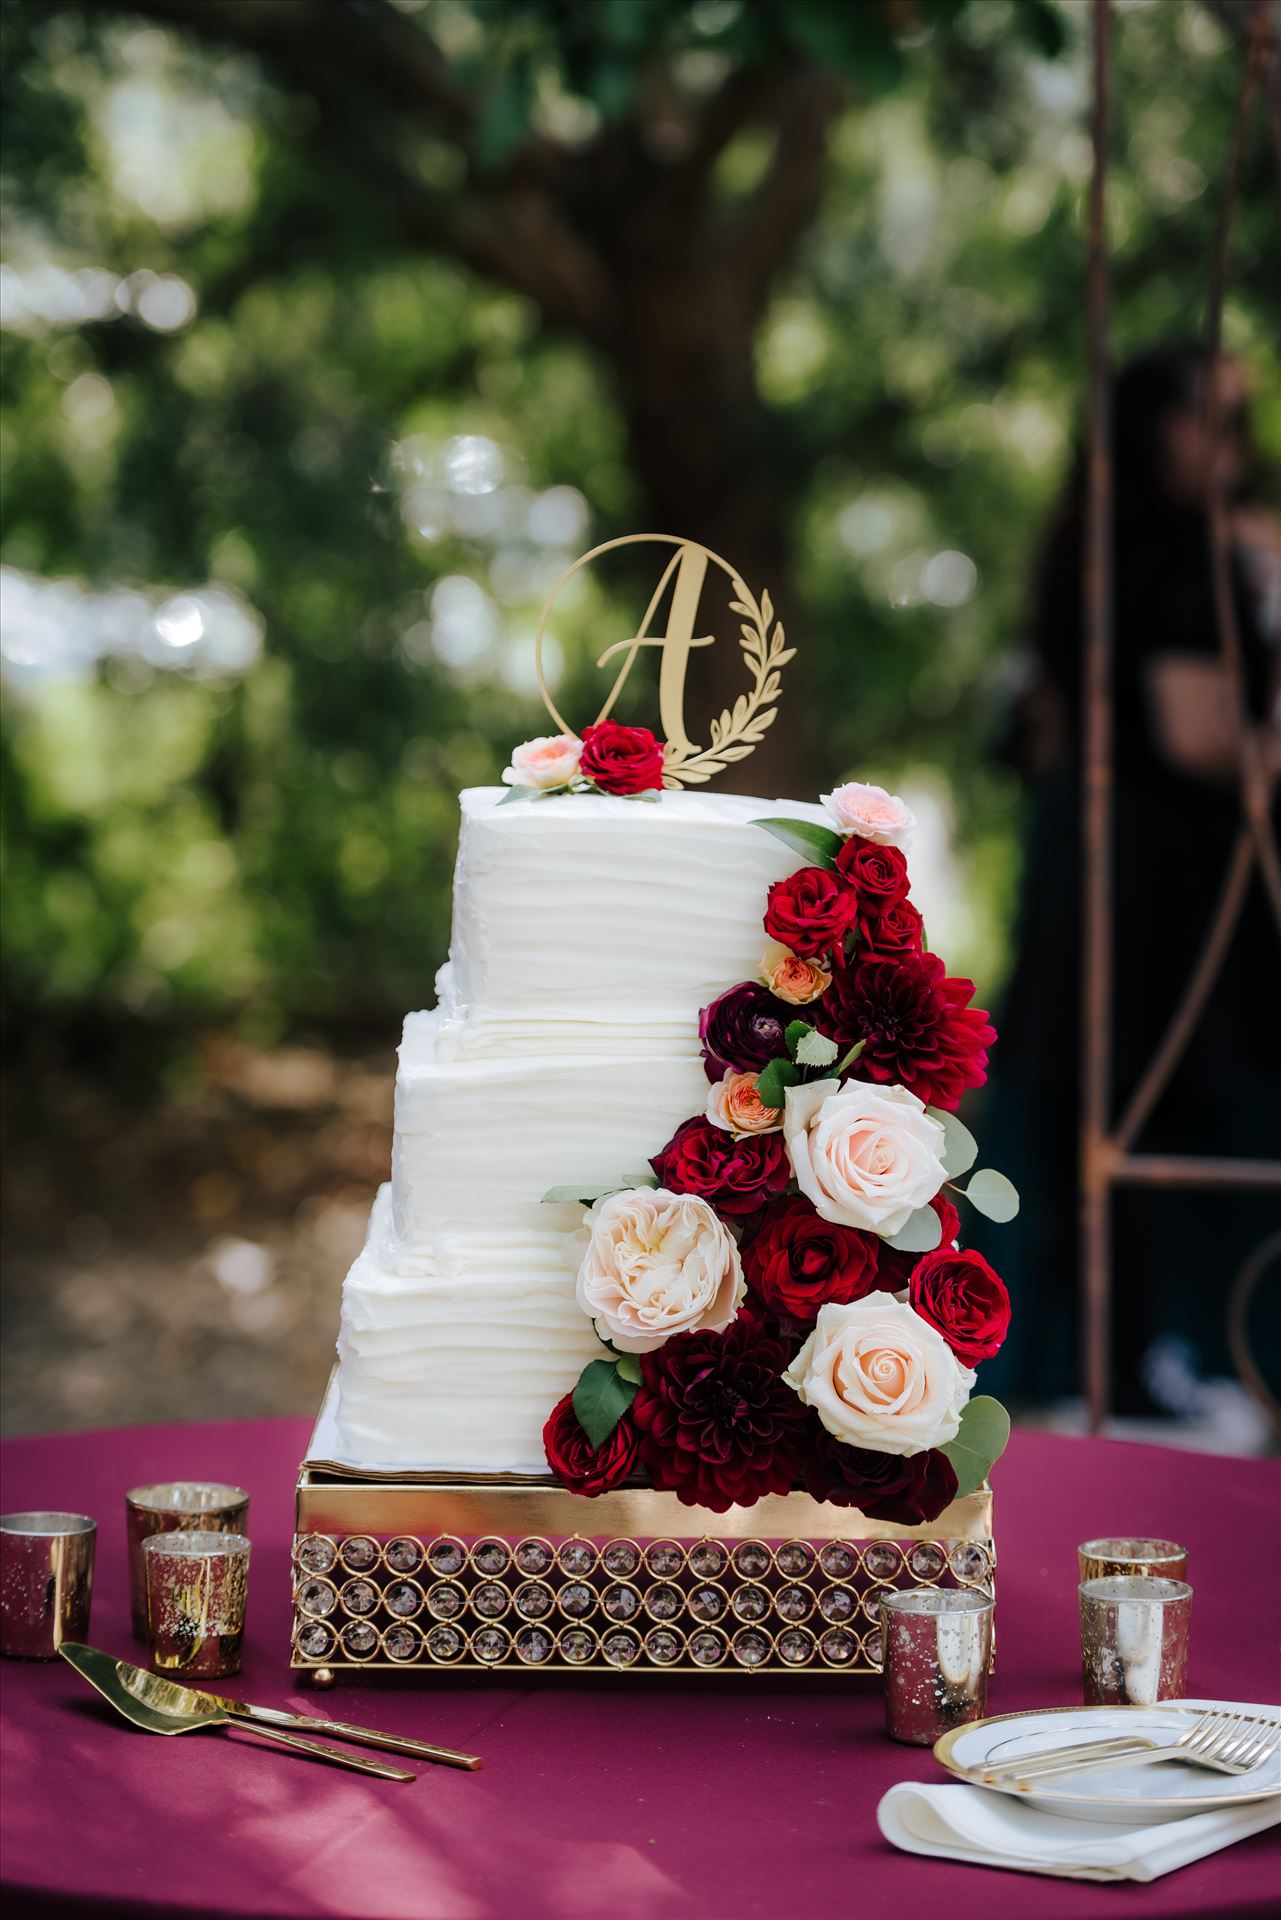 Final-6186.JPG Mirror's Edge Photography, San Luis Obispo Wedding Photographer, captures The Audettes at The Gardens and Peacock Farms in Arroyo Grande, California.  Amazing wedding cake with roses by Sarah Williams